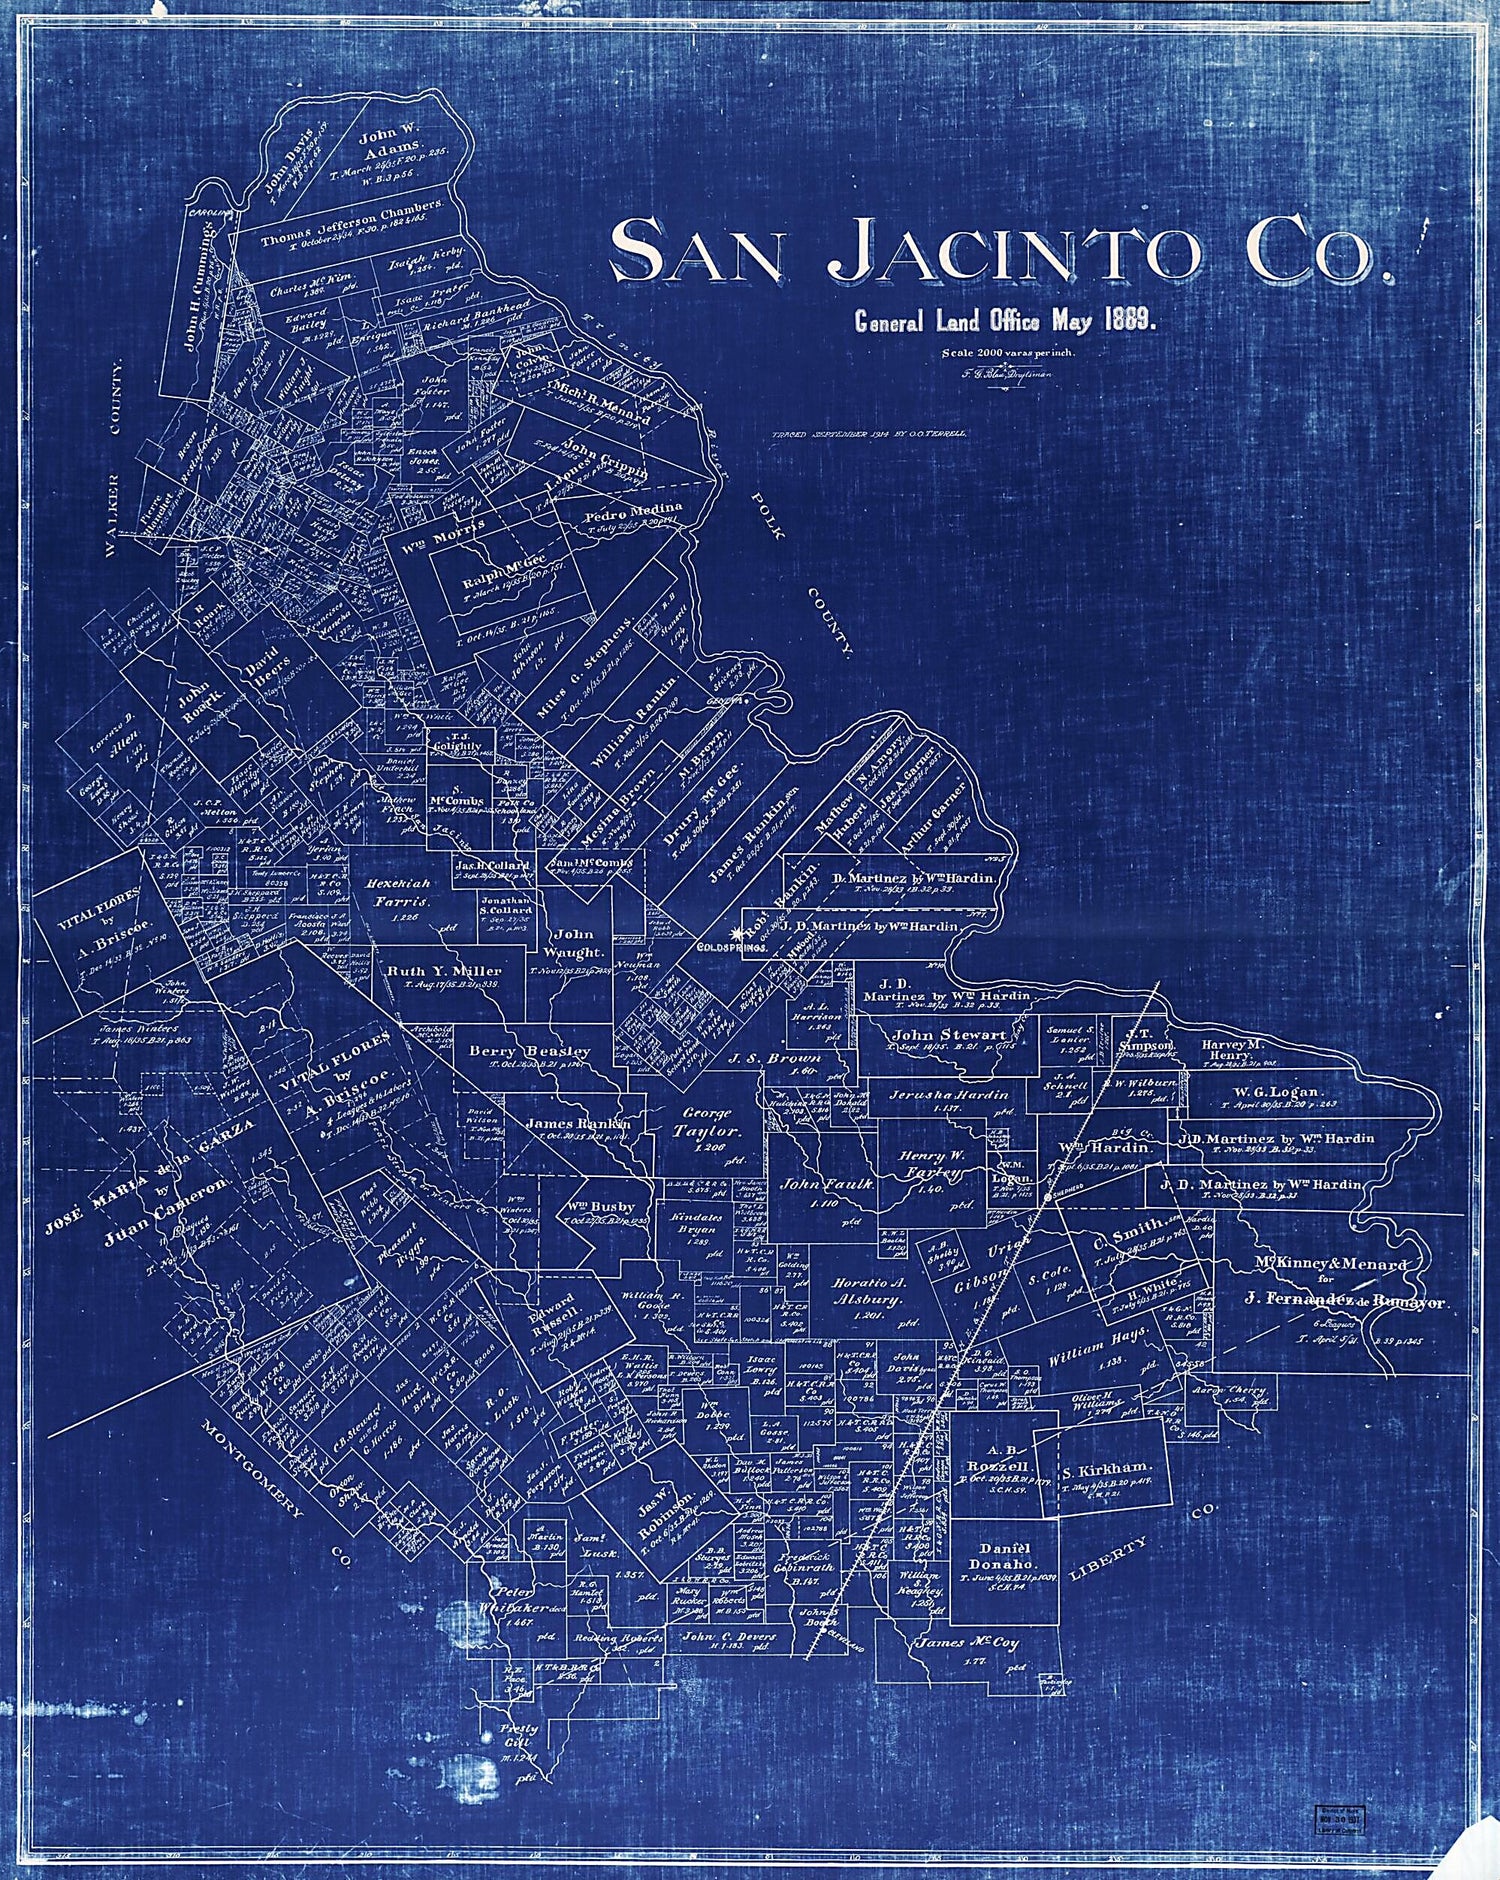 This old map of San Jacinto Co from 1914 was created by F. G. Blau in 1914